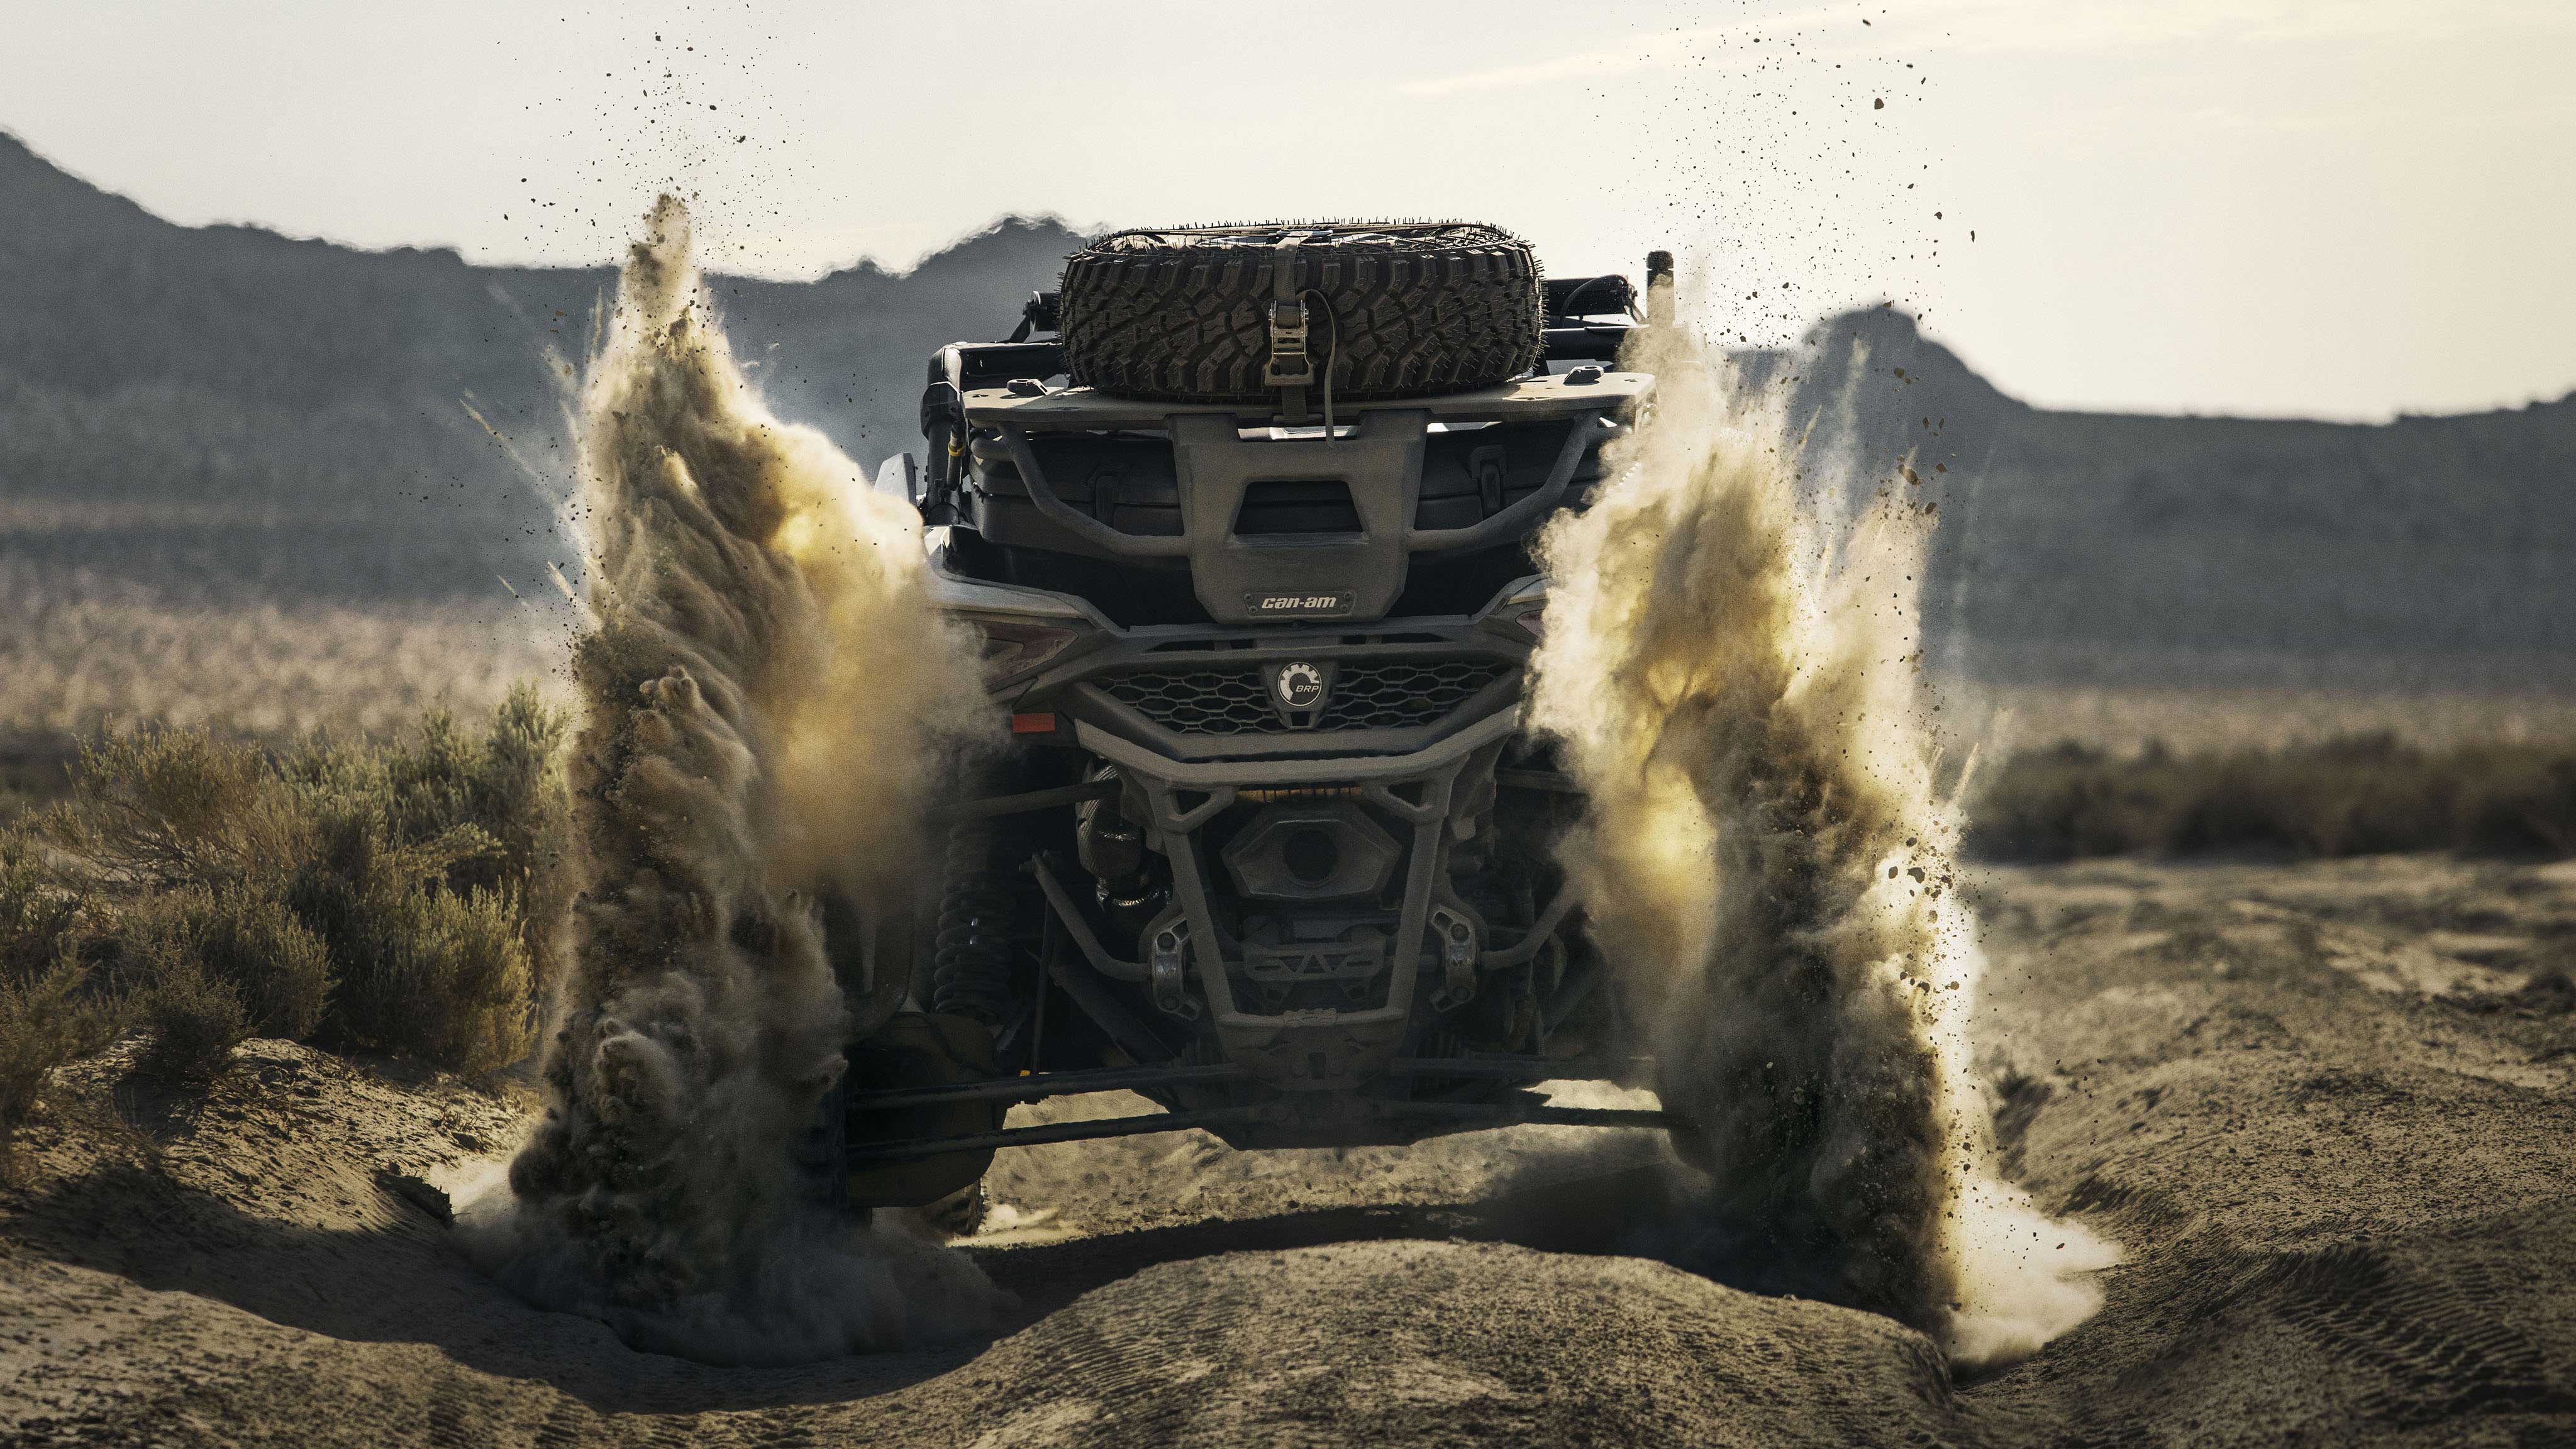 A Can-Am Maverick R revving up dust in the desert